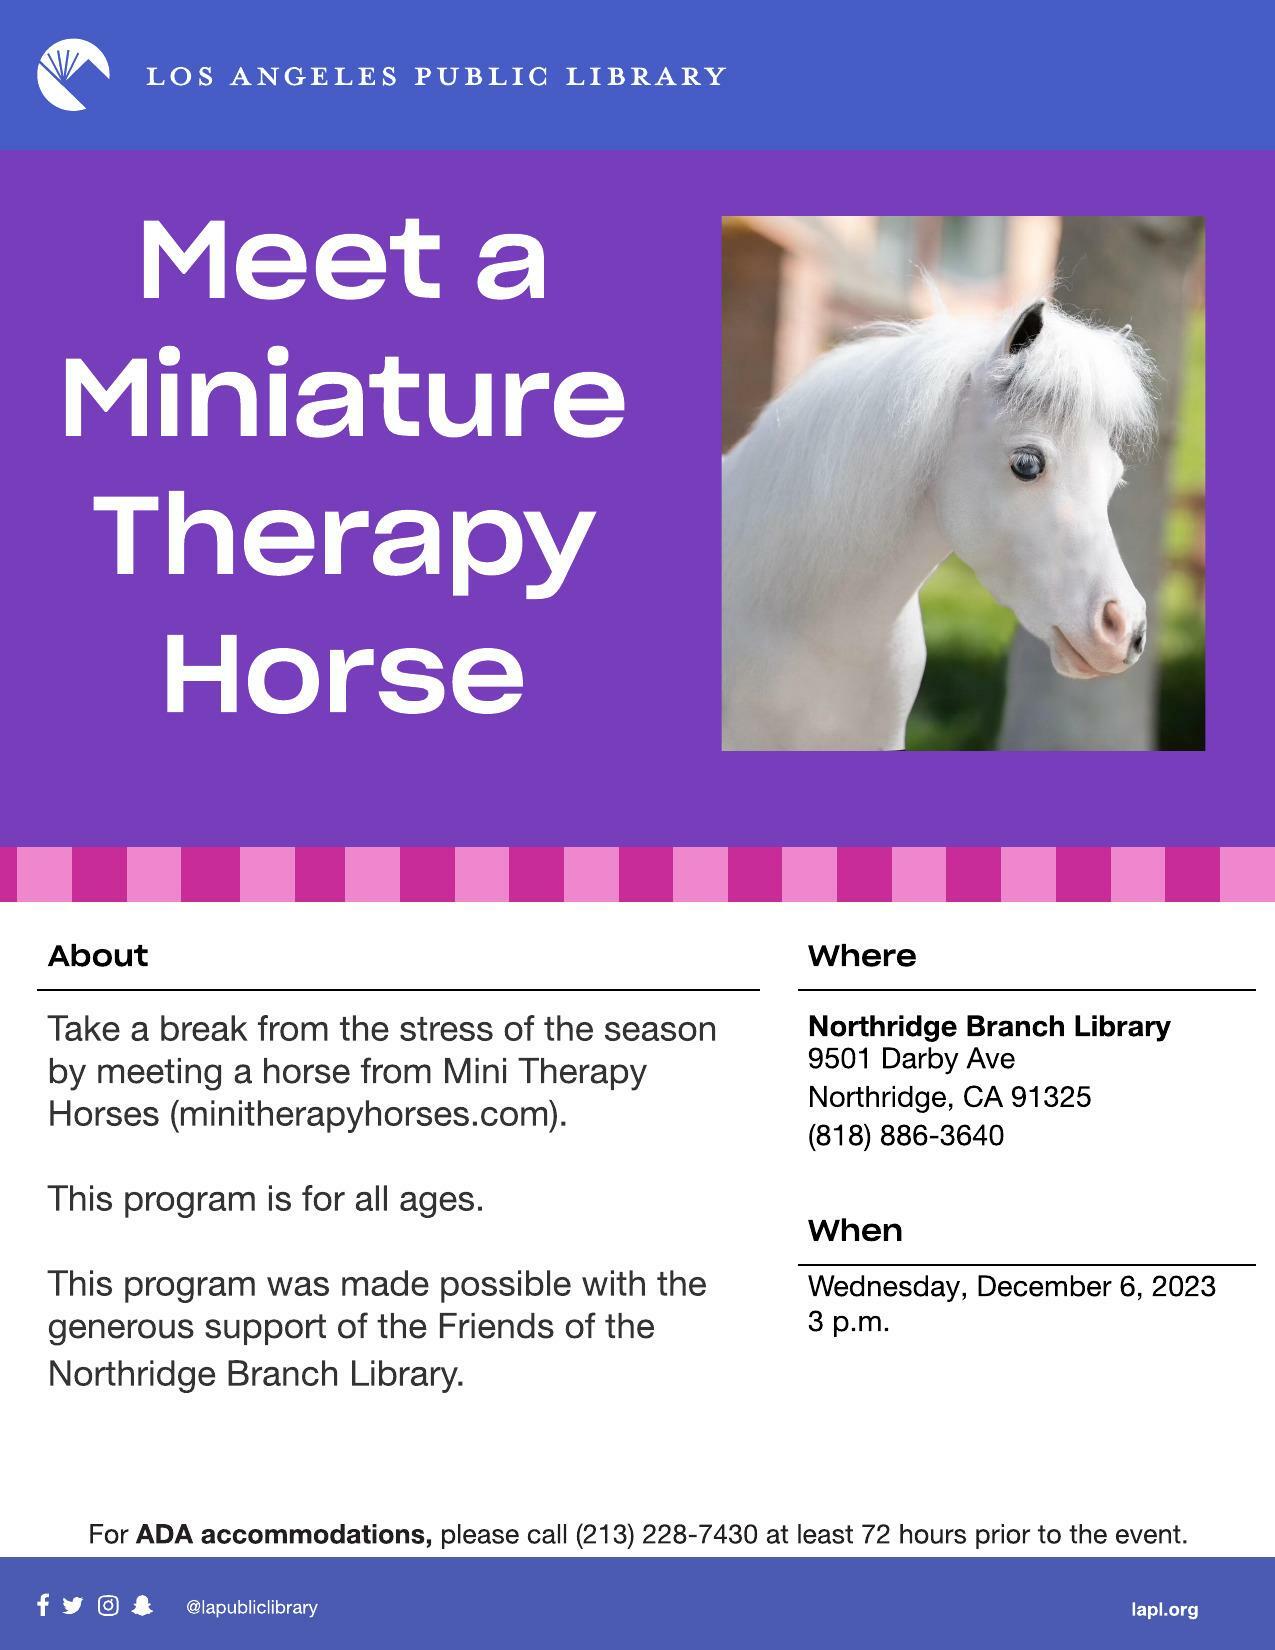 Meet a miniature therapy horse at Northridge Branch Library, 9501 Darby Ave, Northridge, CA 91325. Wednesday, December 6, 2023 at 3 p.m. Branch phone number is (818) 886-3640. For ADA accommodations, please call (213) 228-7430 at least 72 hours prior to the event.